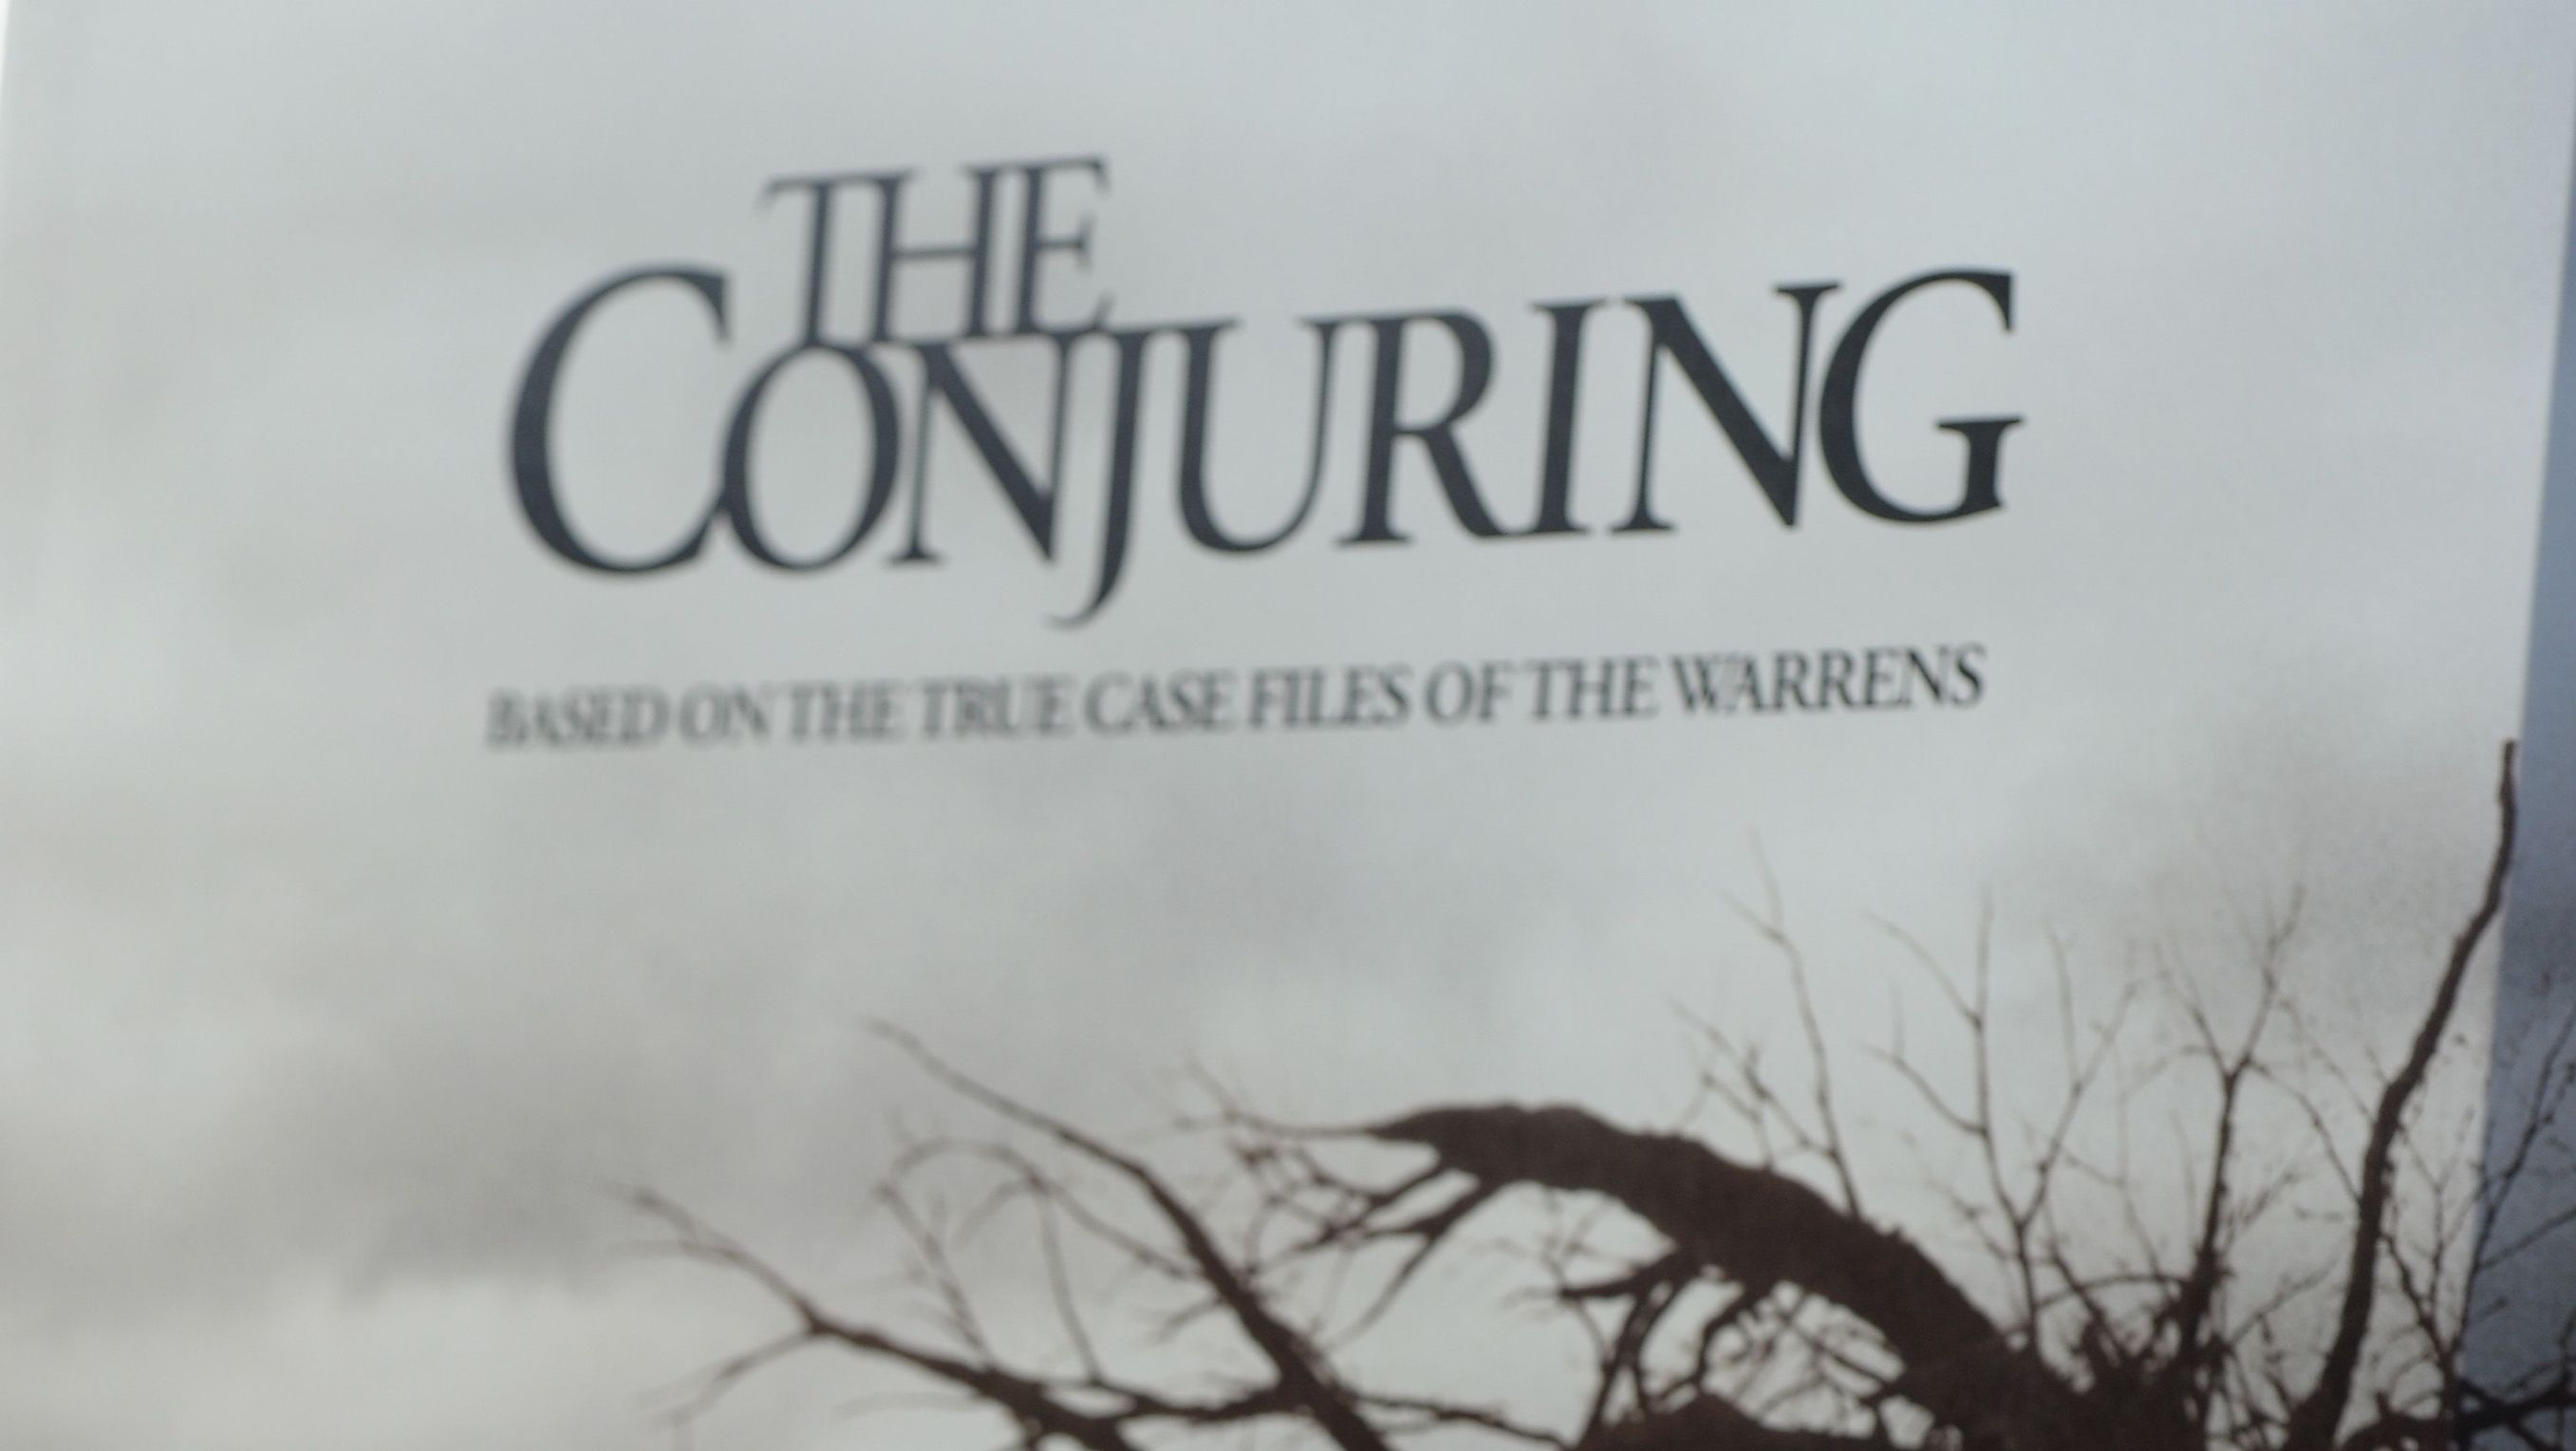 A poster for 'The Conjuring' film.